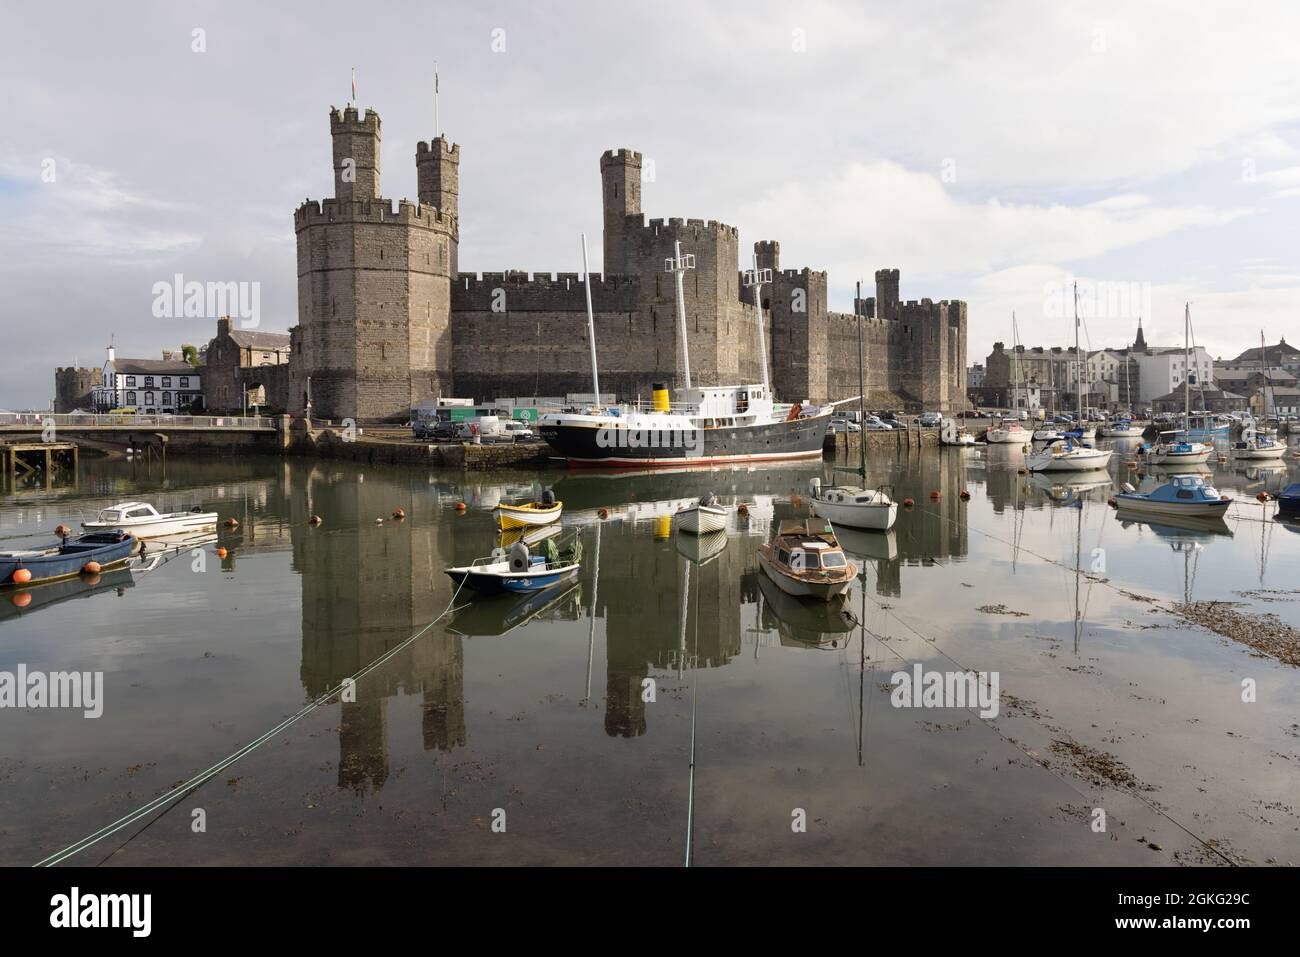 Caernarfon, Gwynedd, UK, September 9th 2021: Edward I's castle reflected in the harbour in which are moored small boats and ex-lightship Britain. Stock Photo